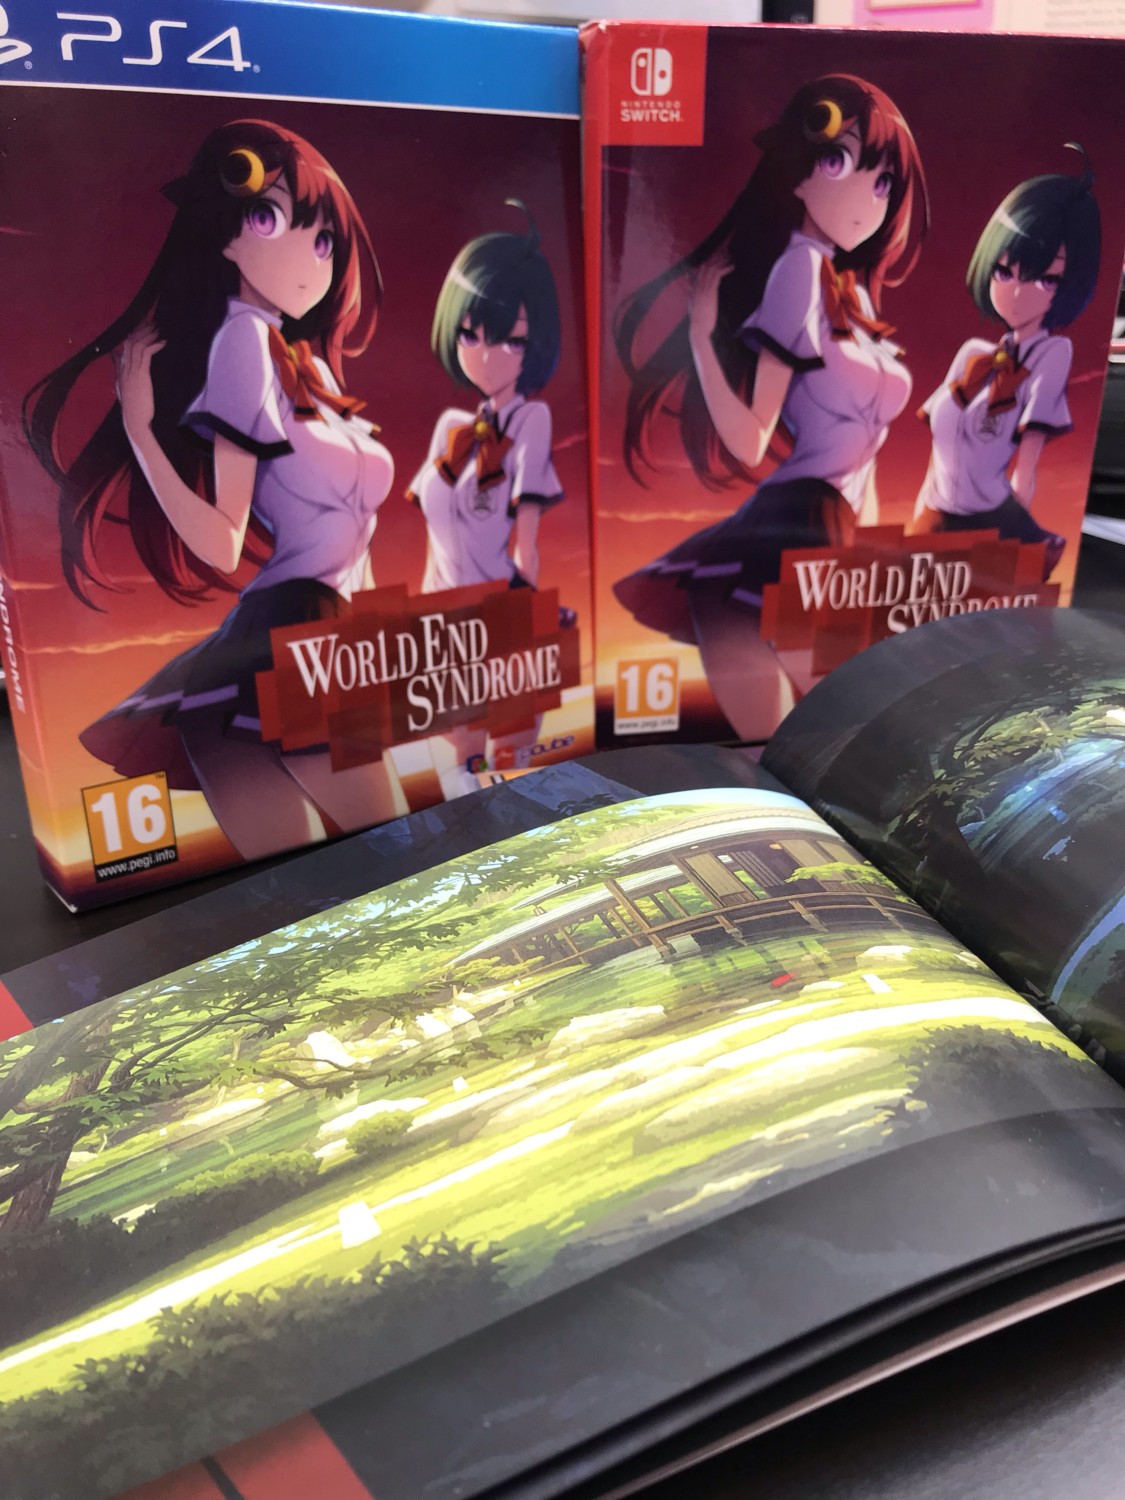 WorldEnd Syndrome Release Date and Exclusive Goody!